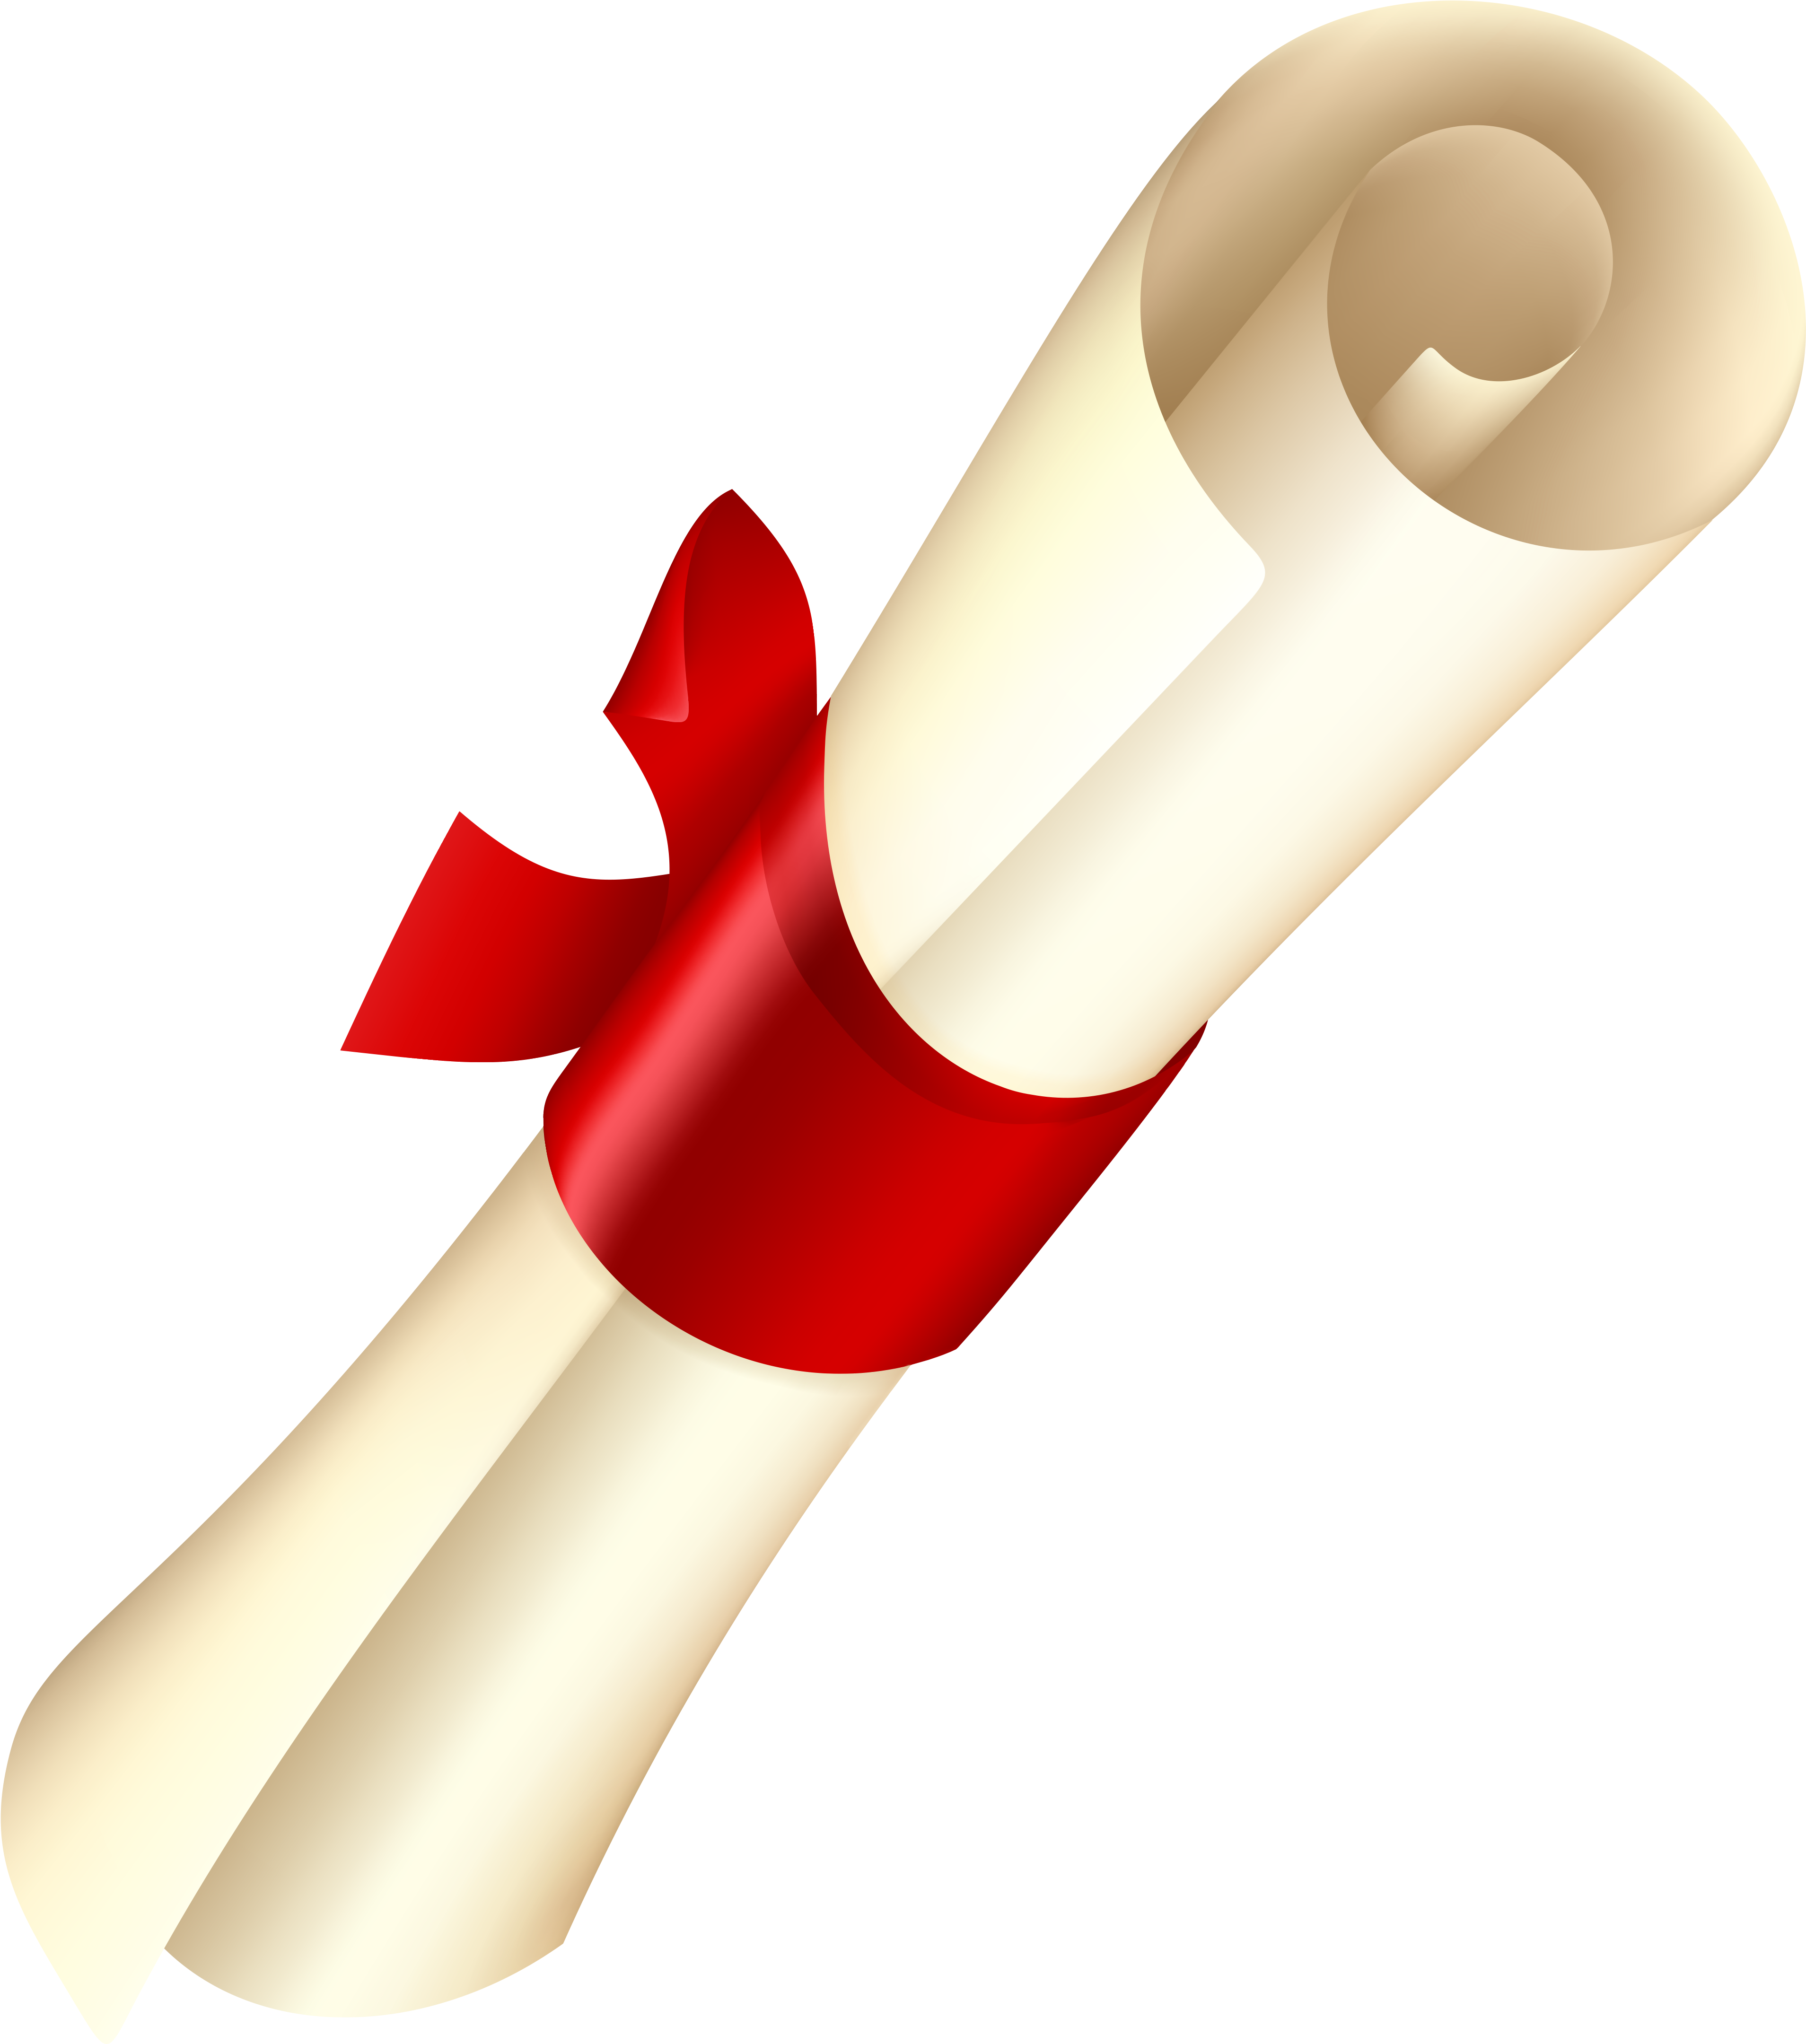 A Rolled Up Paper With A Red Ribbon